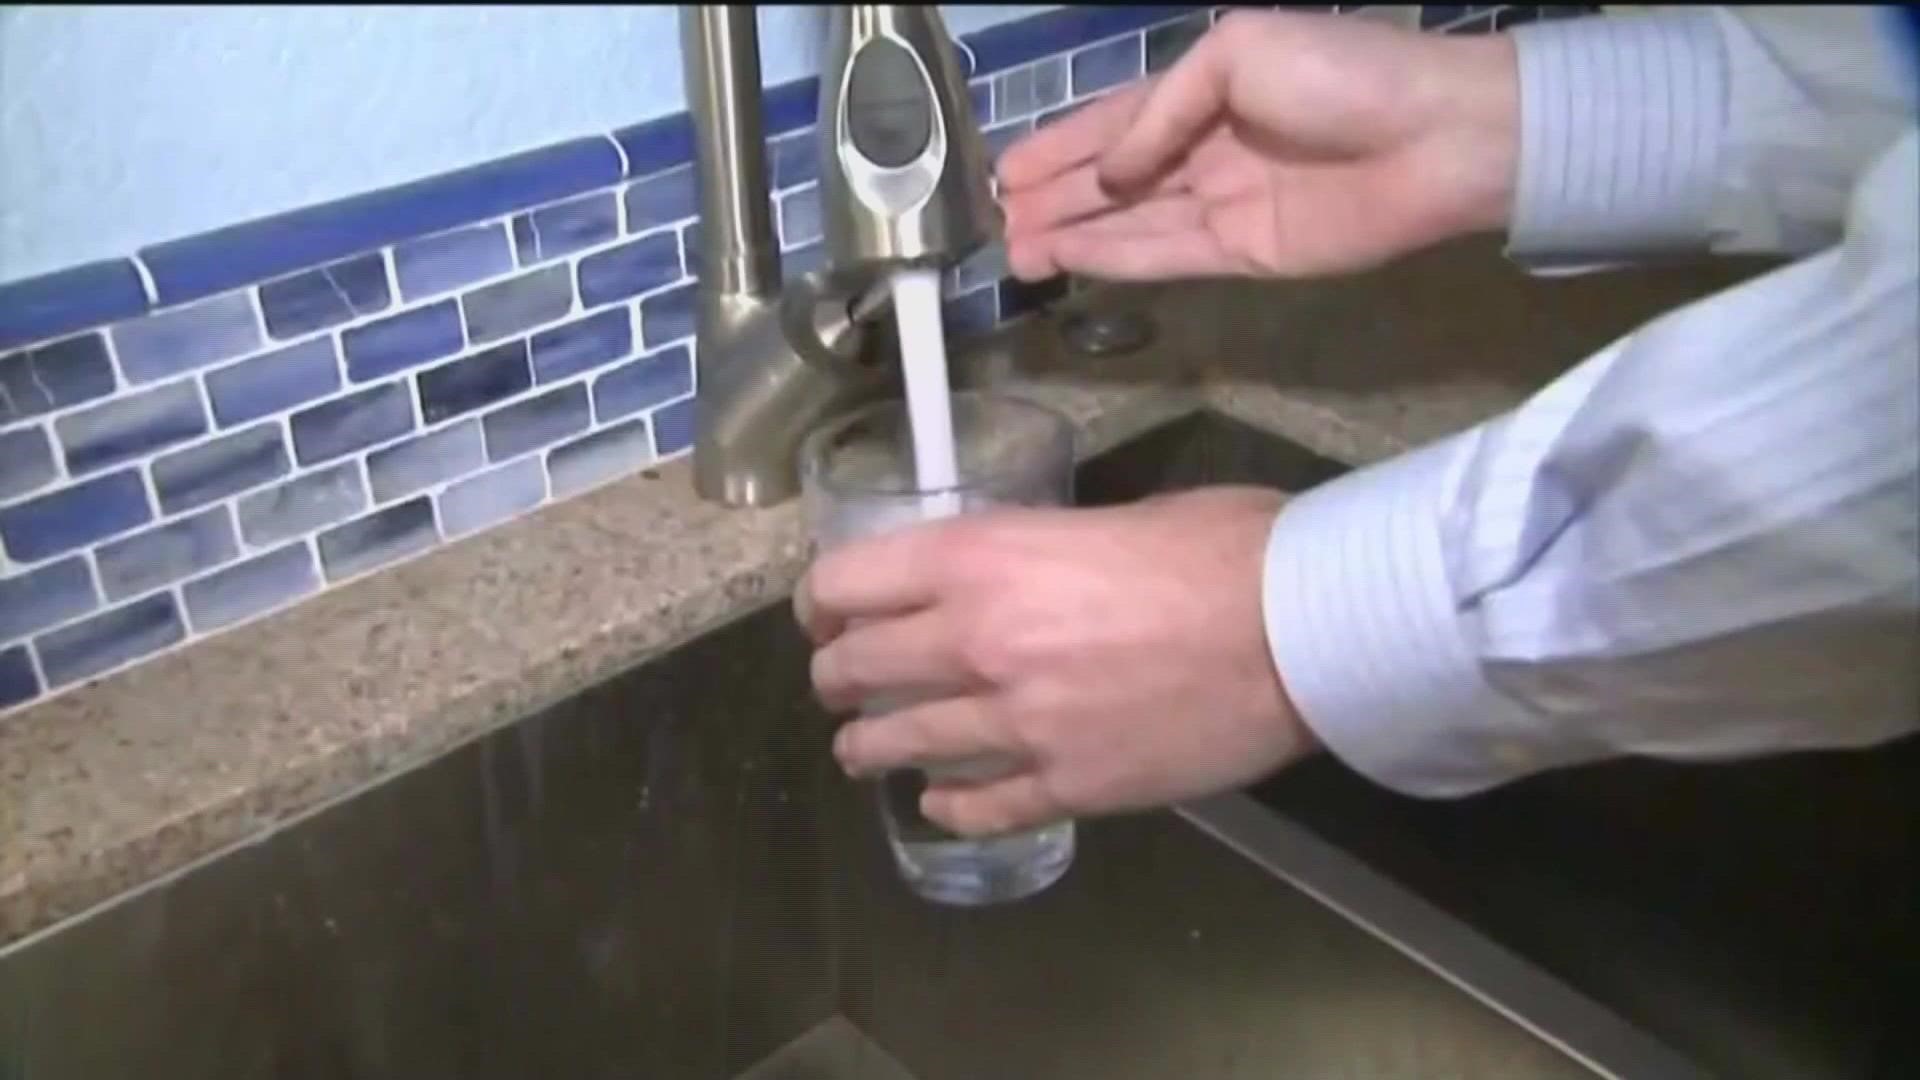 Almost 18,000 Toledoans are advised to boil water before using it. The advisory is in effect until Friday at 5 p.m.